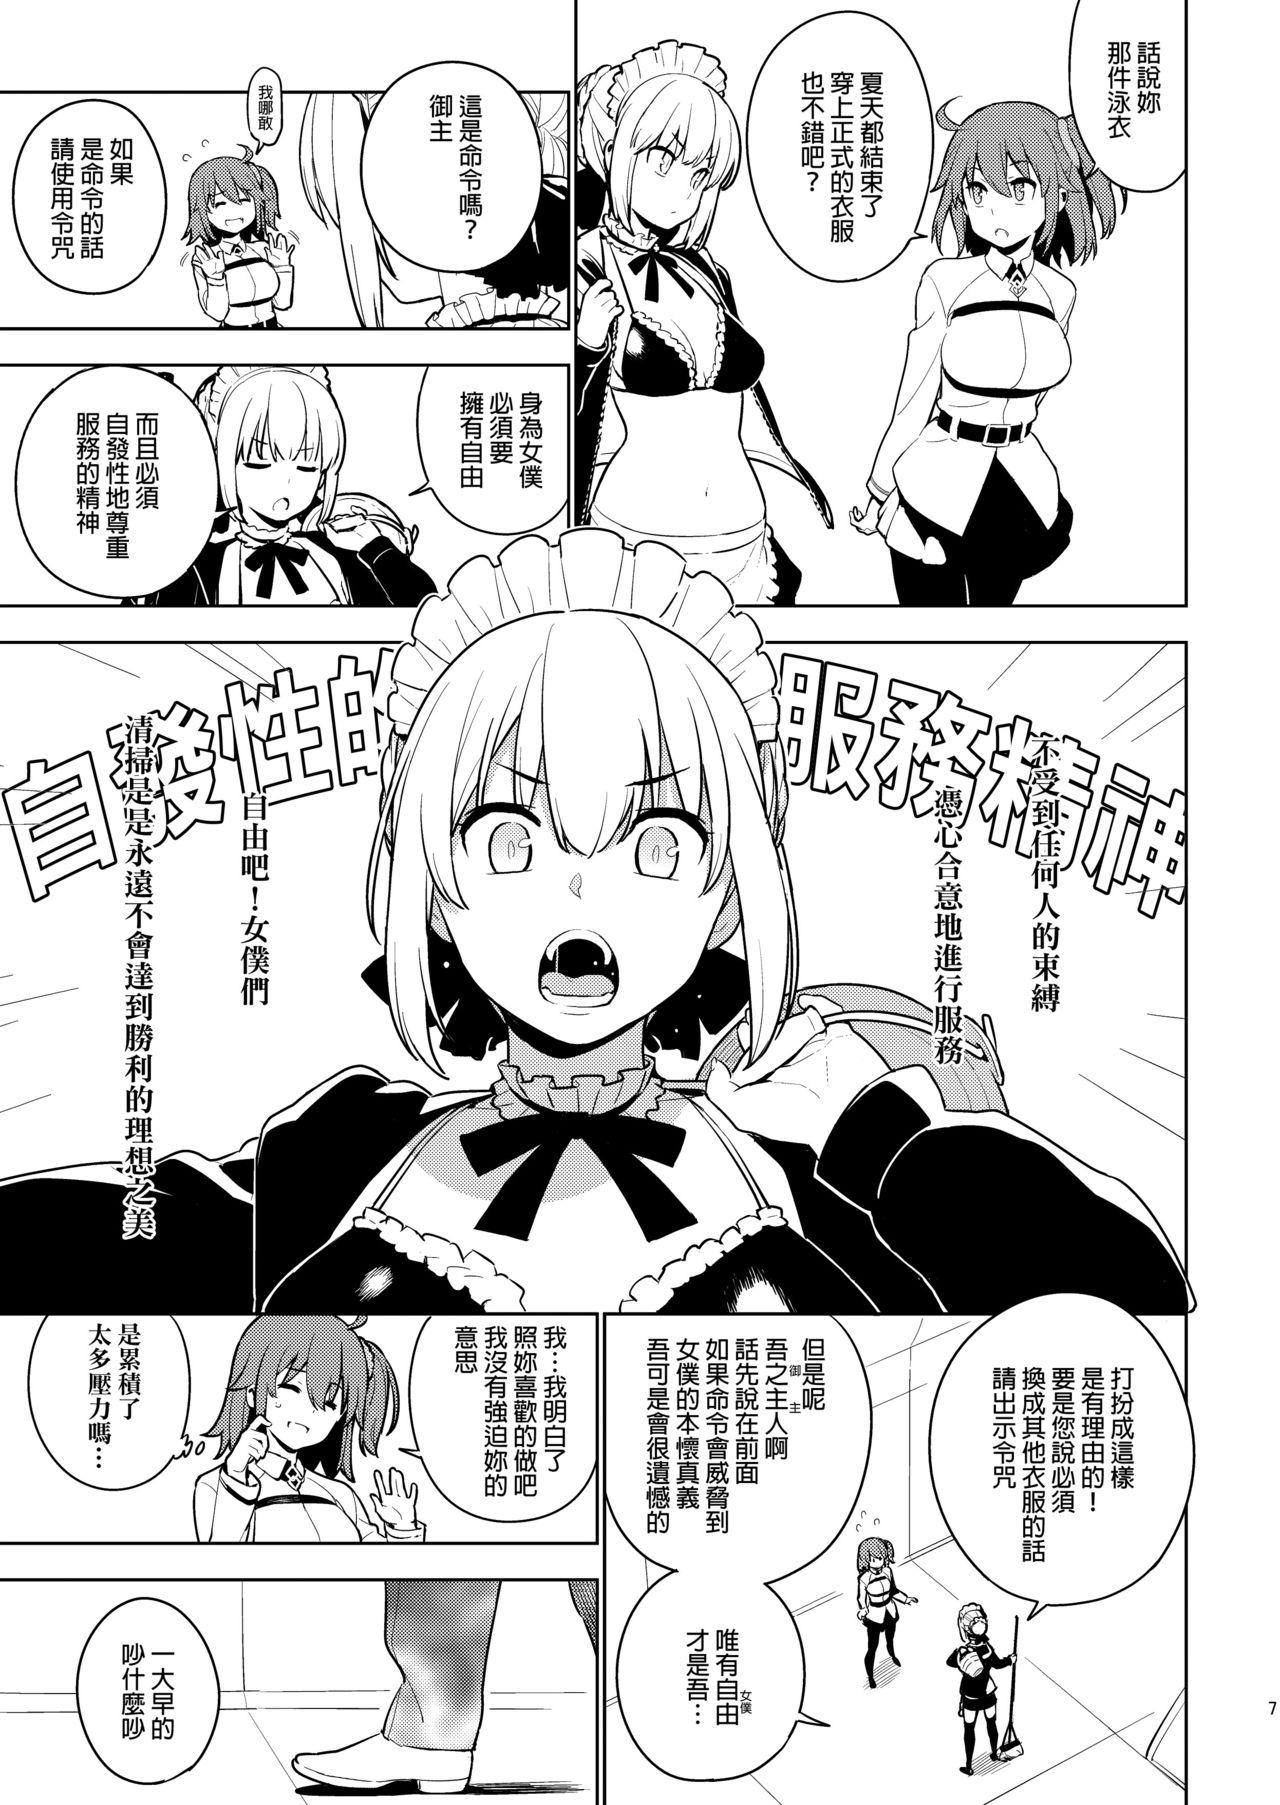 Youporn DELUSION - Fate grand order College - Page 6